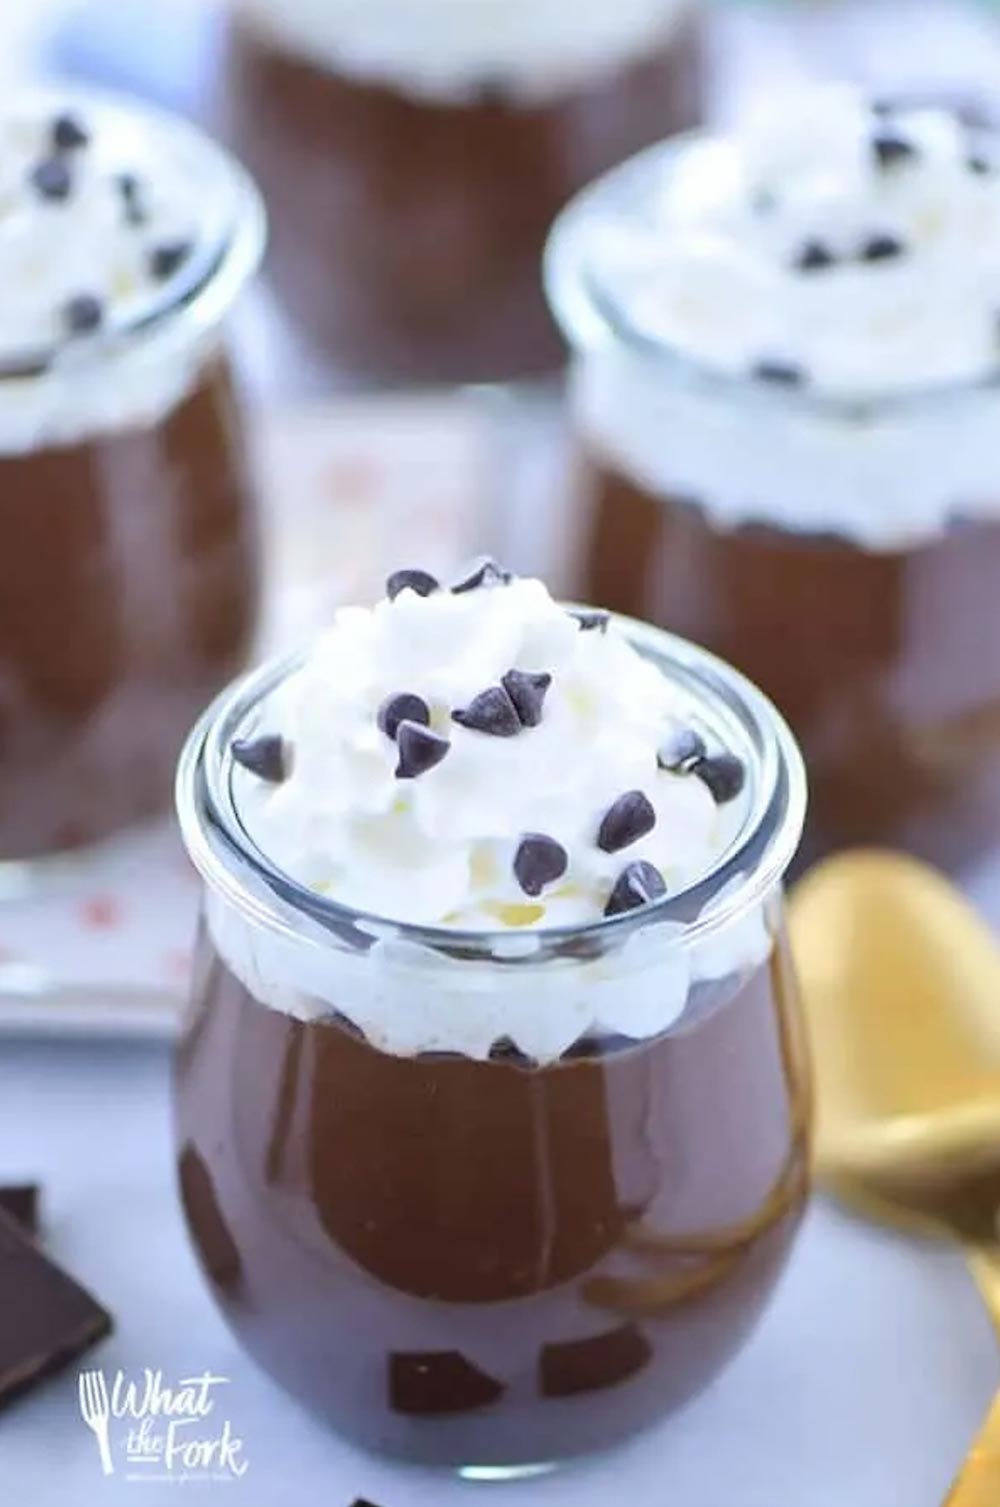 Baileys chocolate pudding in individual serving cups